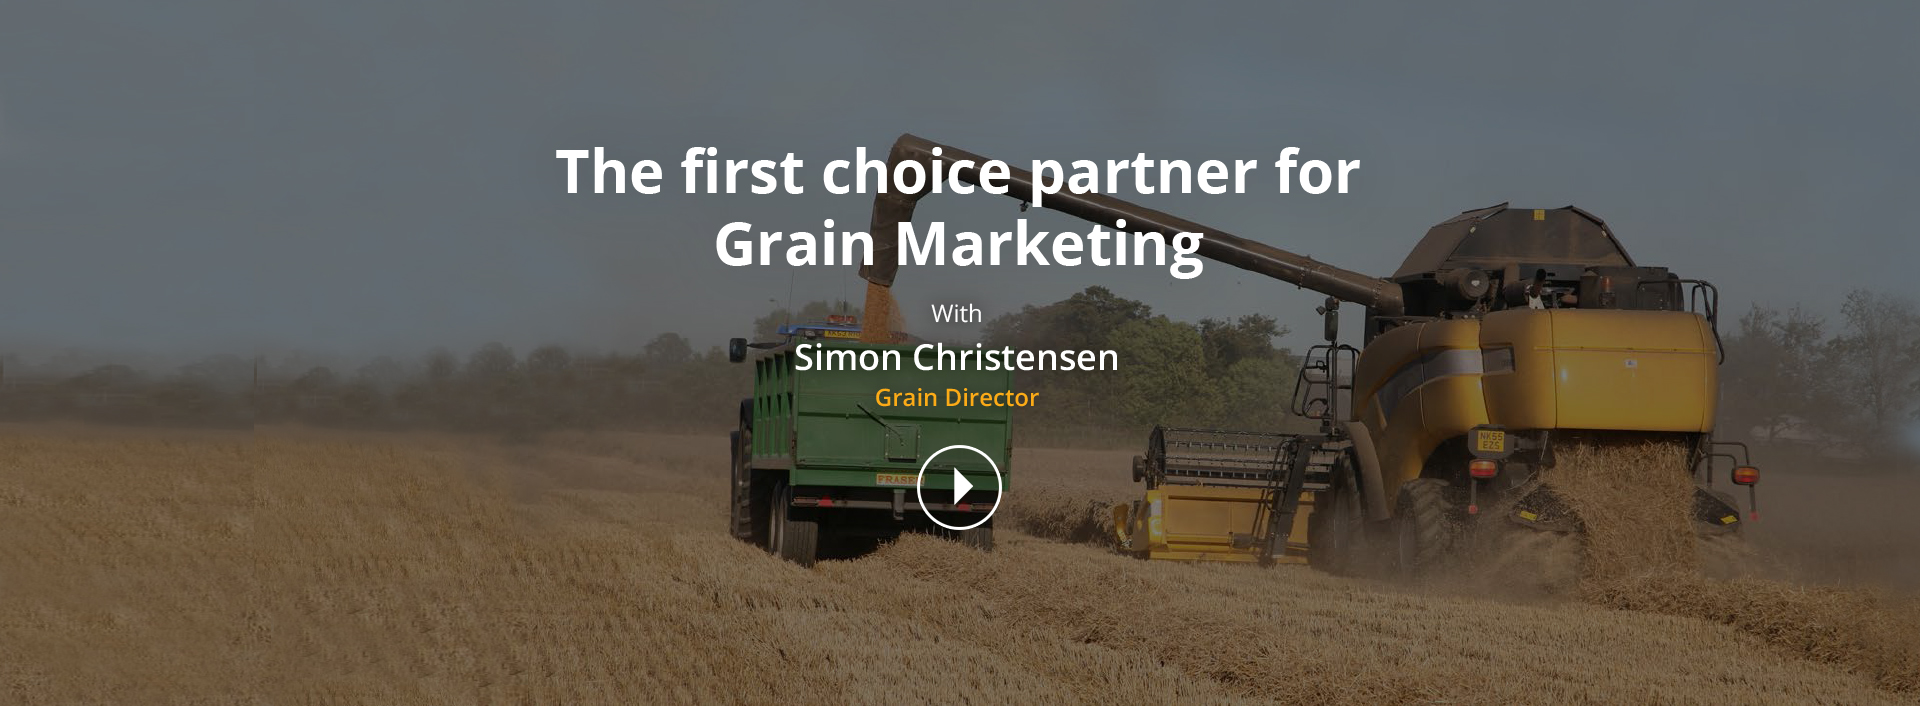 The first choice partner for Grain Marketing